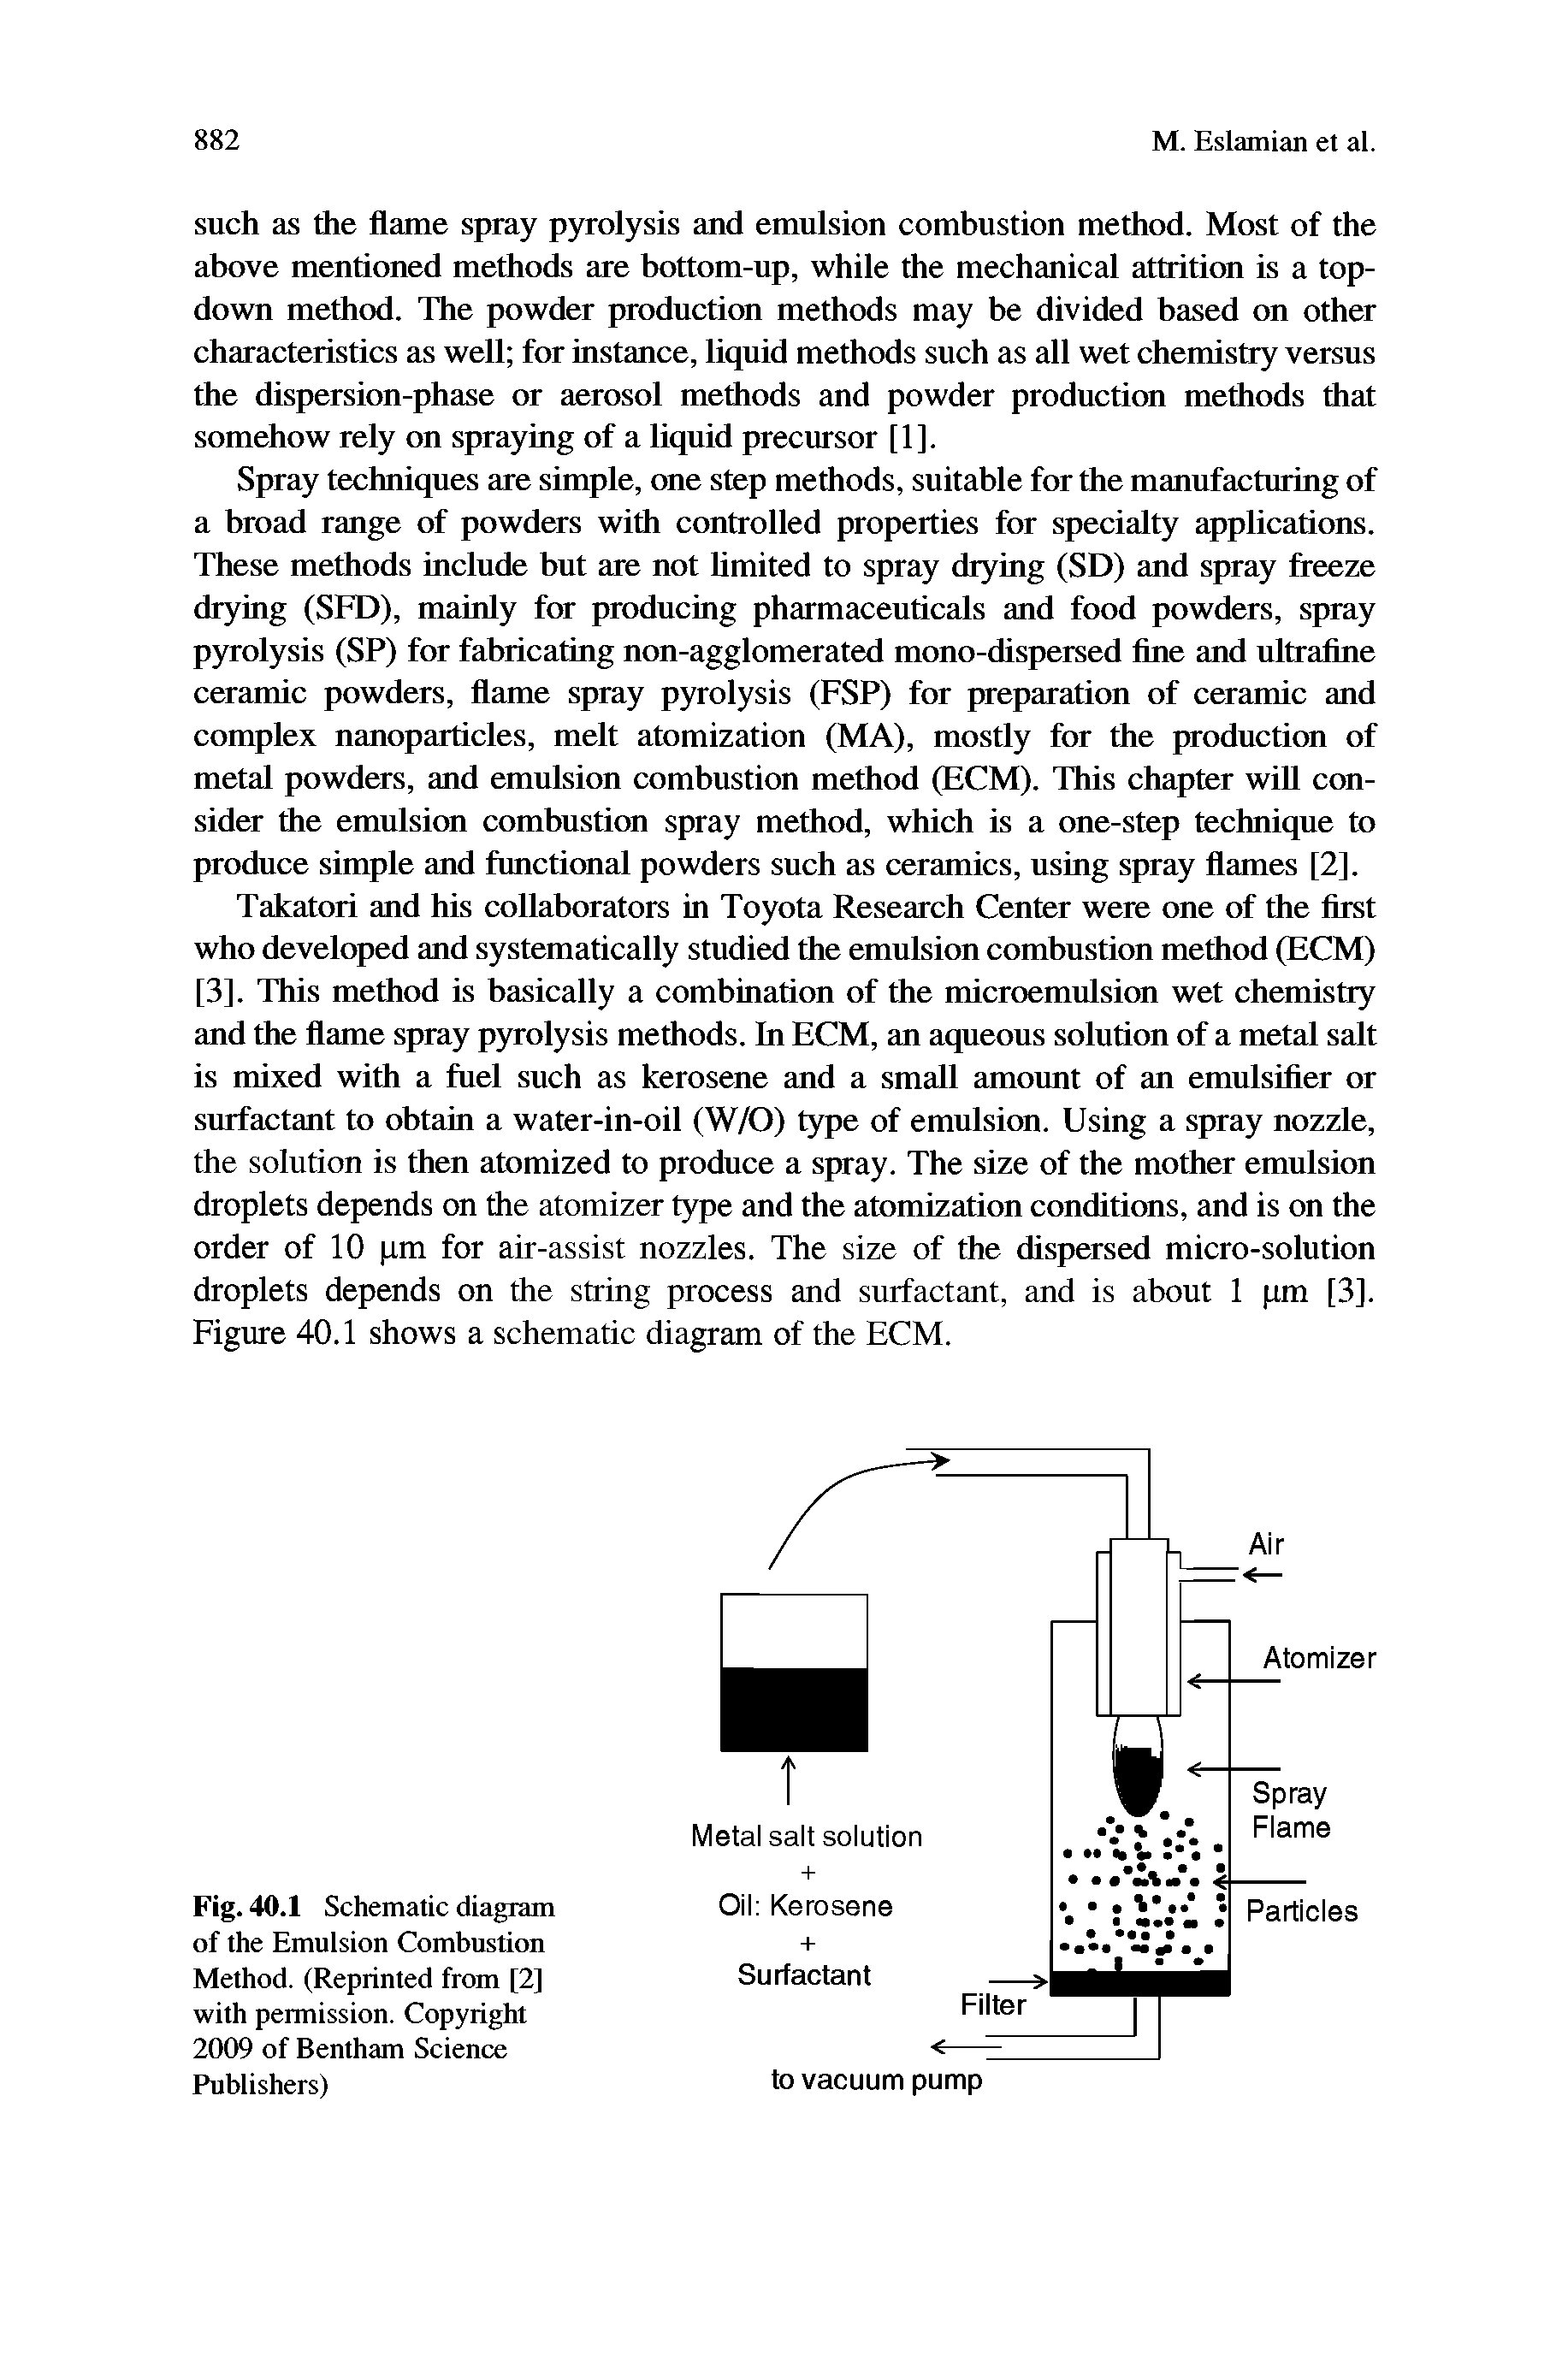 Fig. 40.1 Schematic diagram of the Emulsion Combustion Method. (Reprinted from [2] with permission. Copyright 2009 of Bentham Science Publishers)...